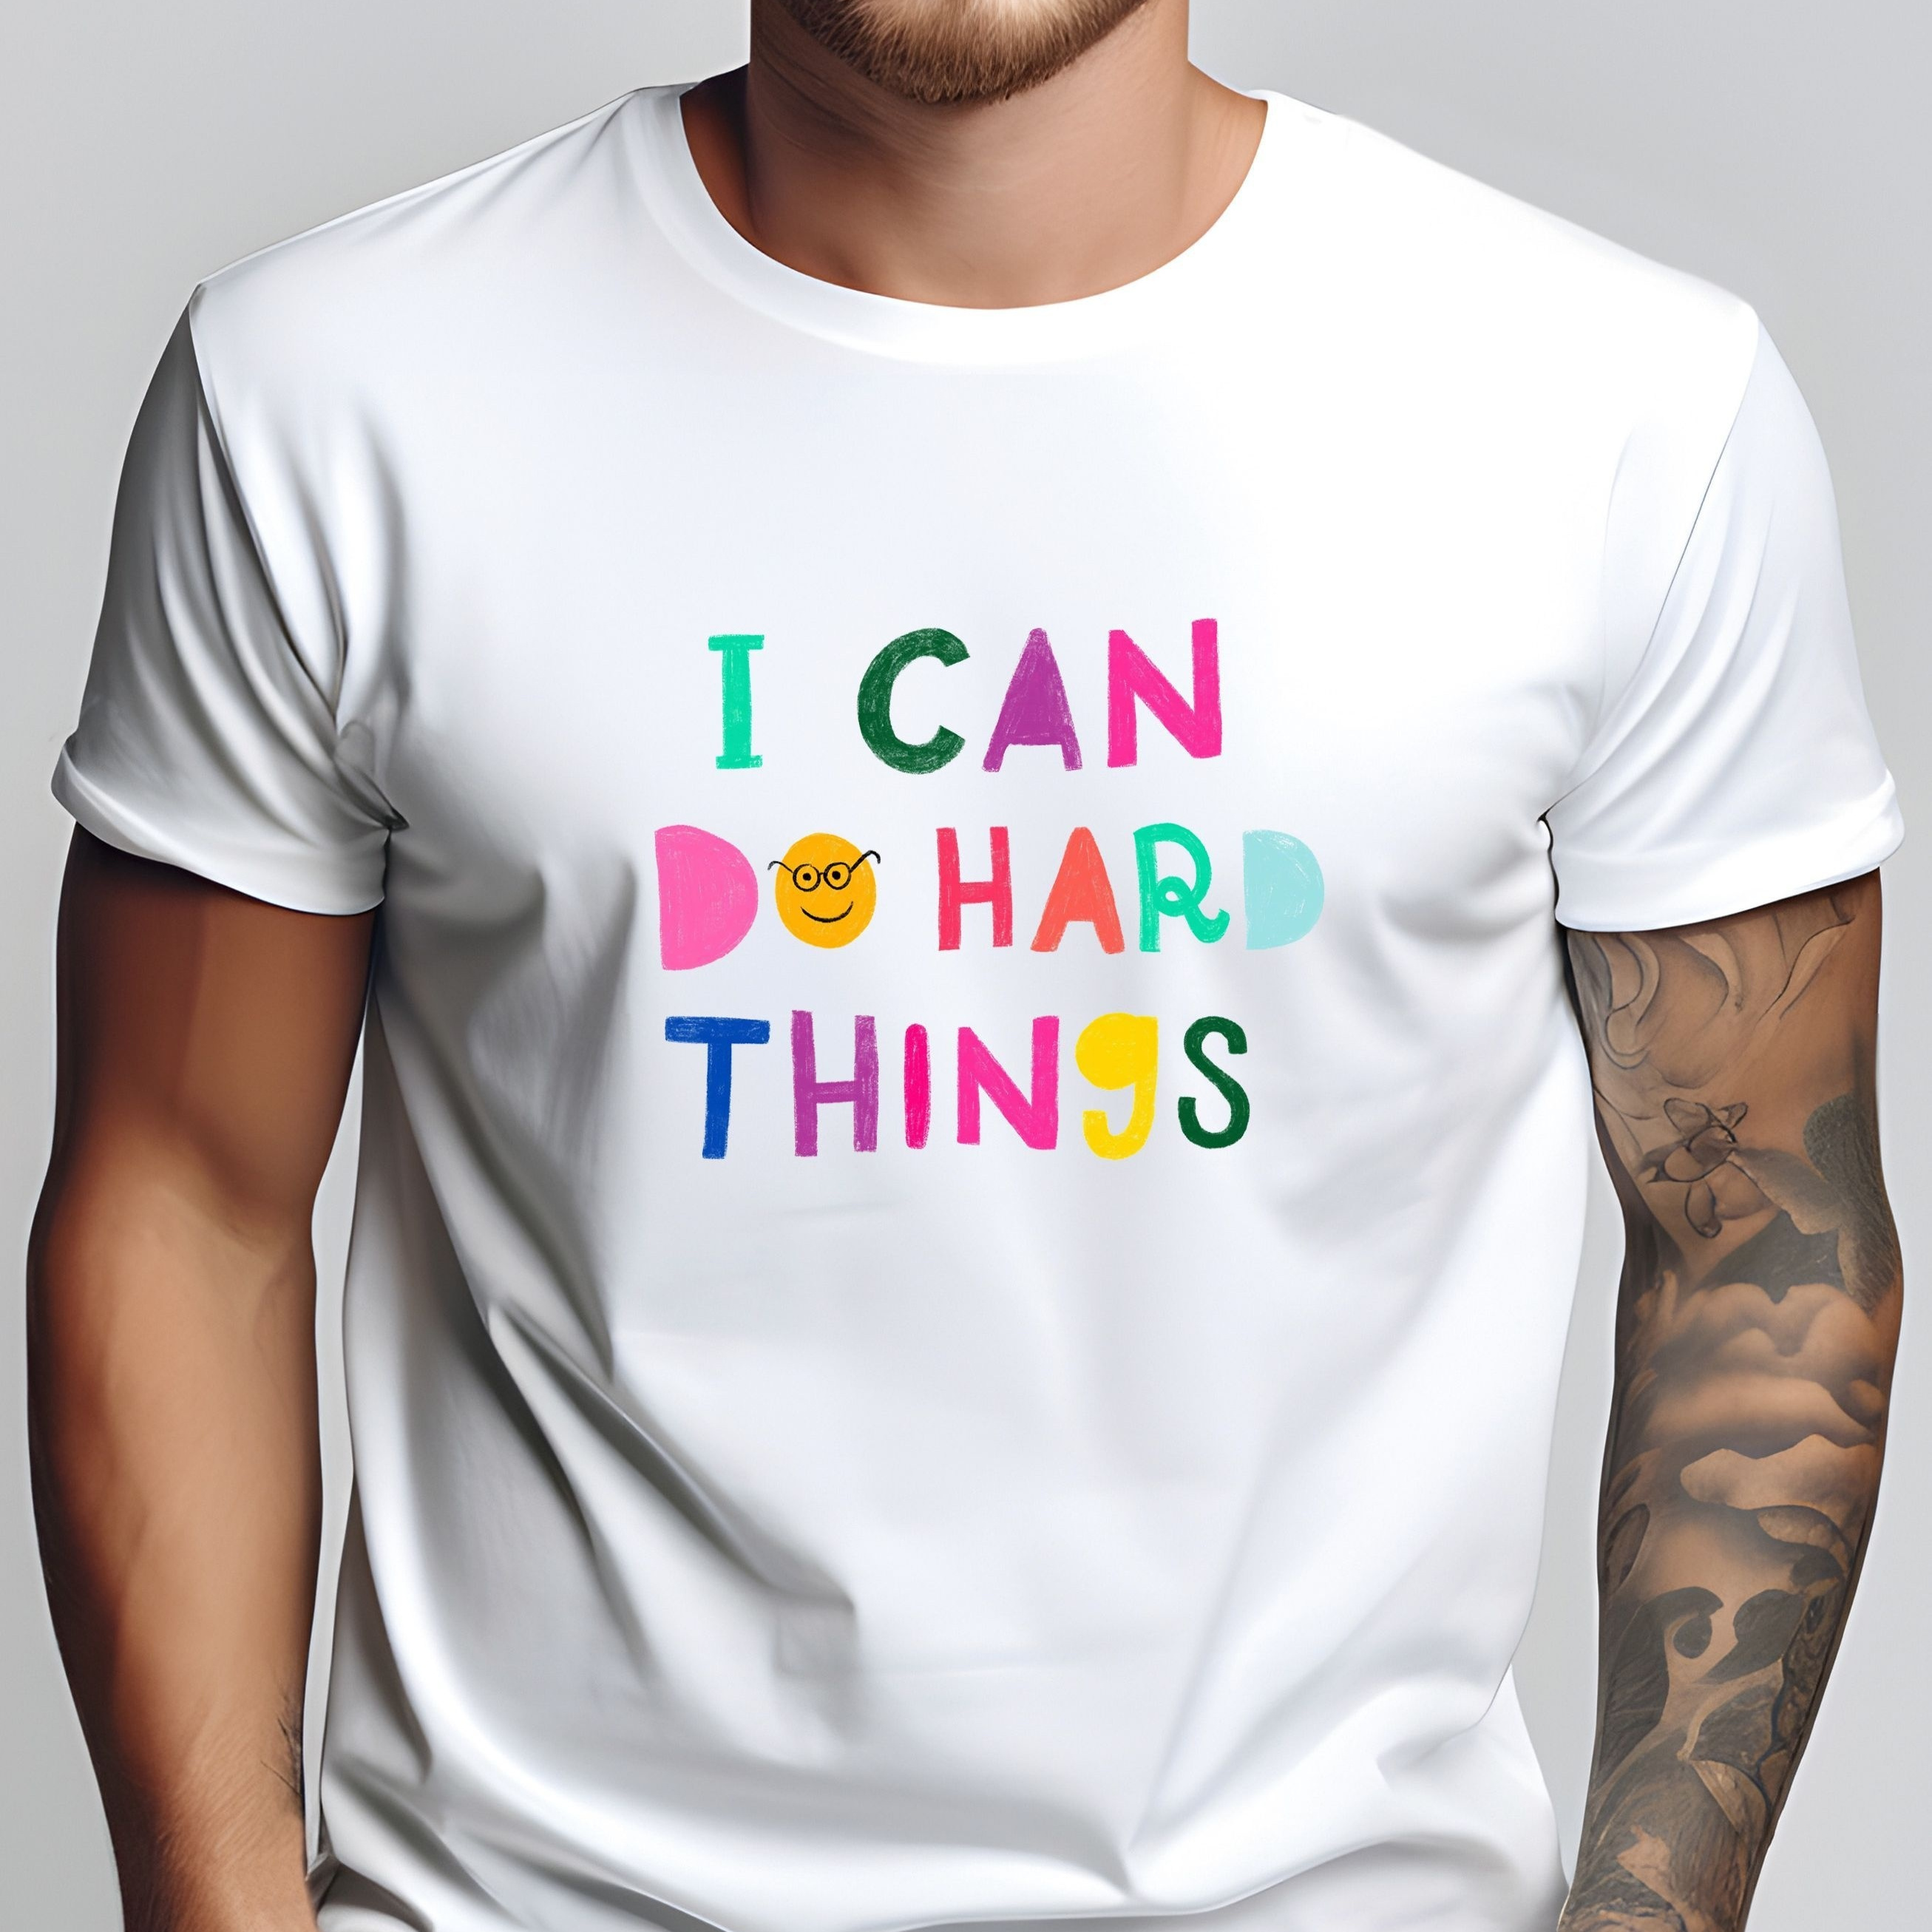 

I Can Do Hard Things Print Tee Shirt, Tees For Men, Casual Short Sleeve T-shirt For Summer